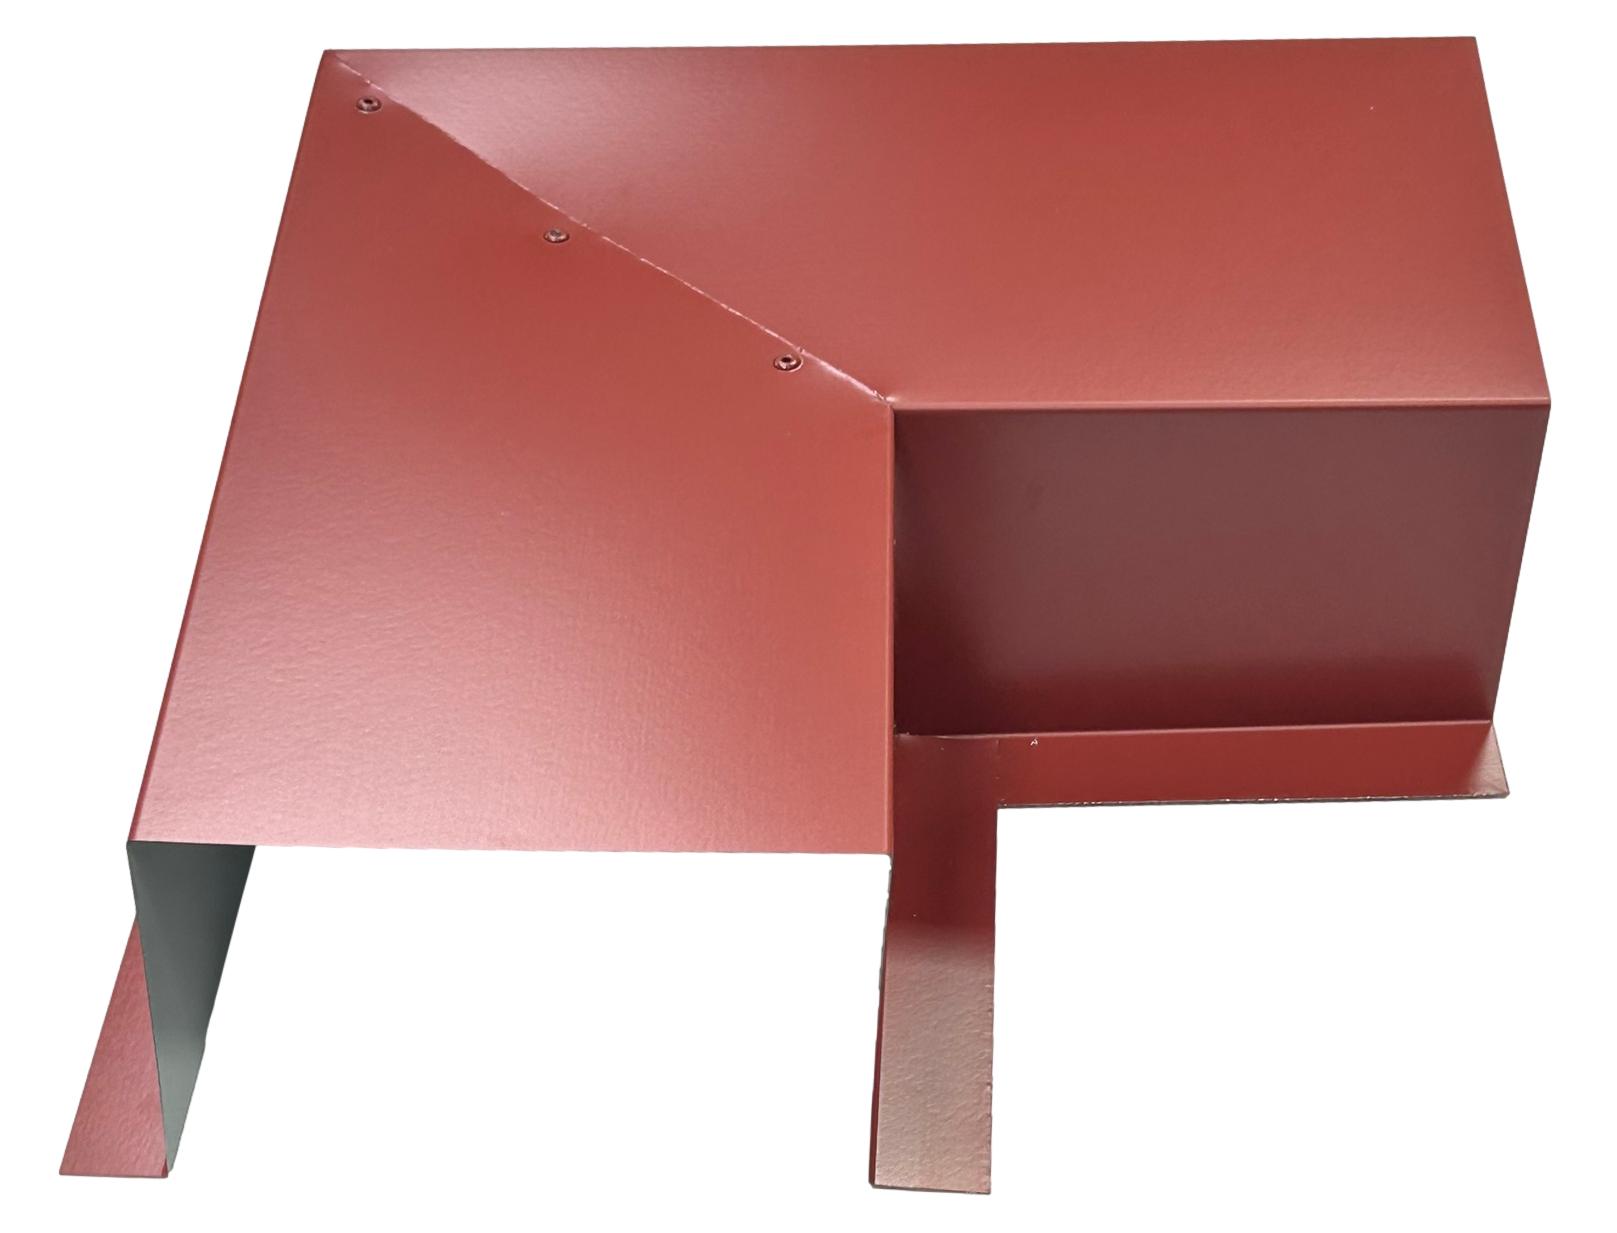 A red, angular metal object with sharp edges and a geometric design, featuring a flat section and raised portion. There are visible screws on the top surface. The step-like structure and overhanging part suggest integration with HVAC line sets, ensuring easy installation. This object is the Residential Series - Line Set Cover Side Turning Elbows - Premium Quality by Perma Cover.